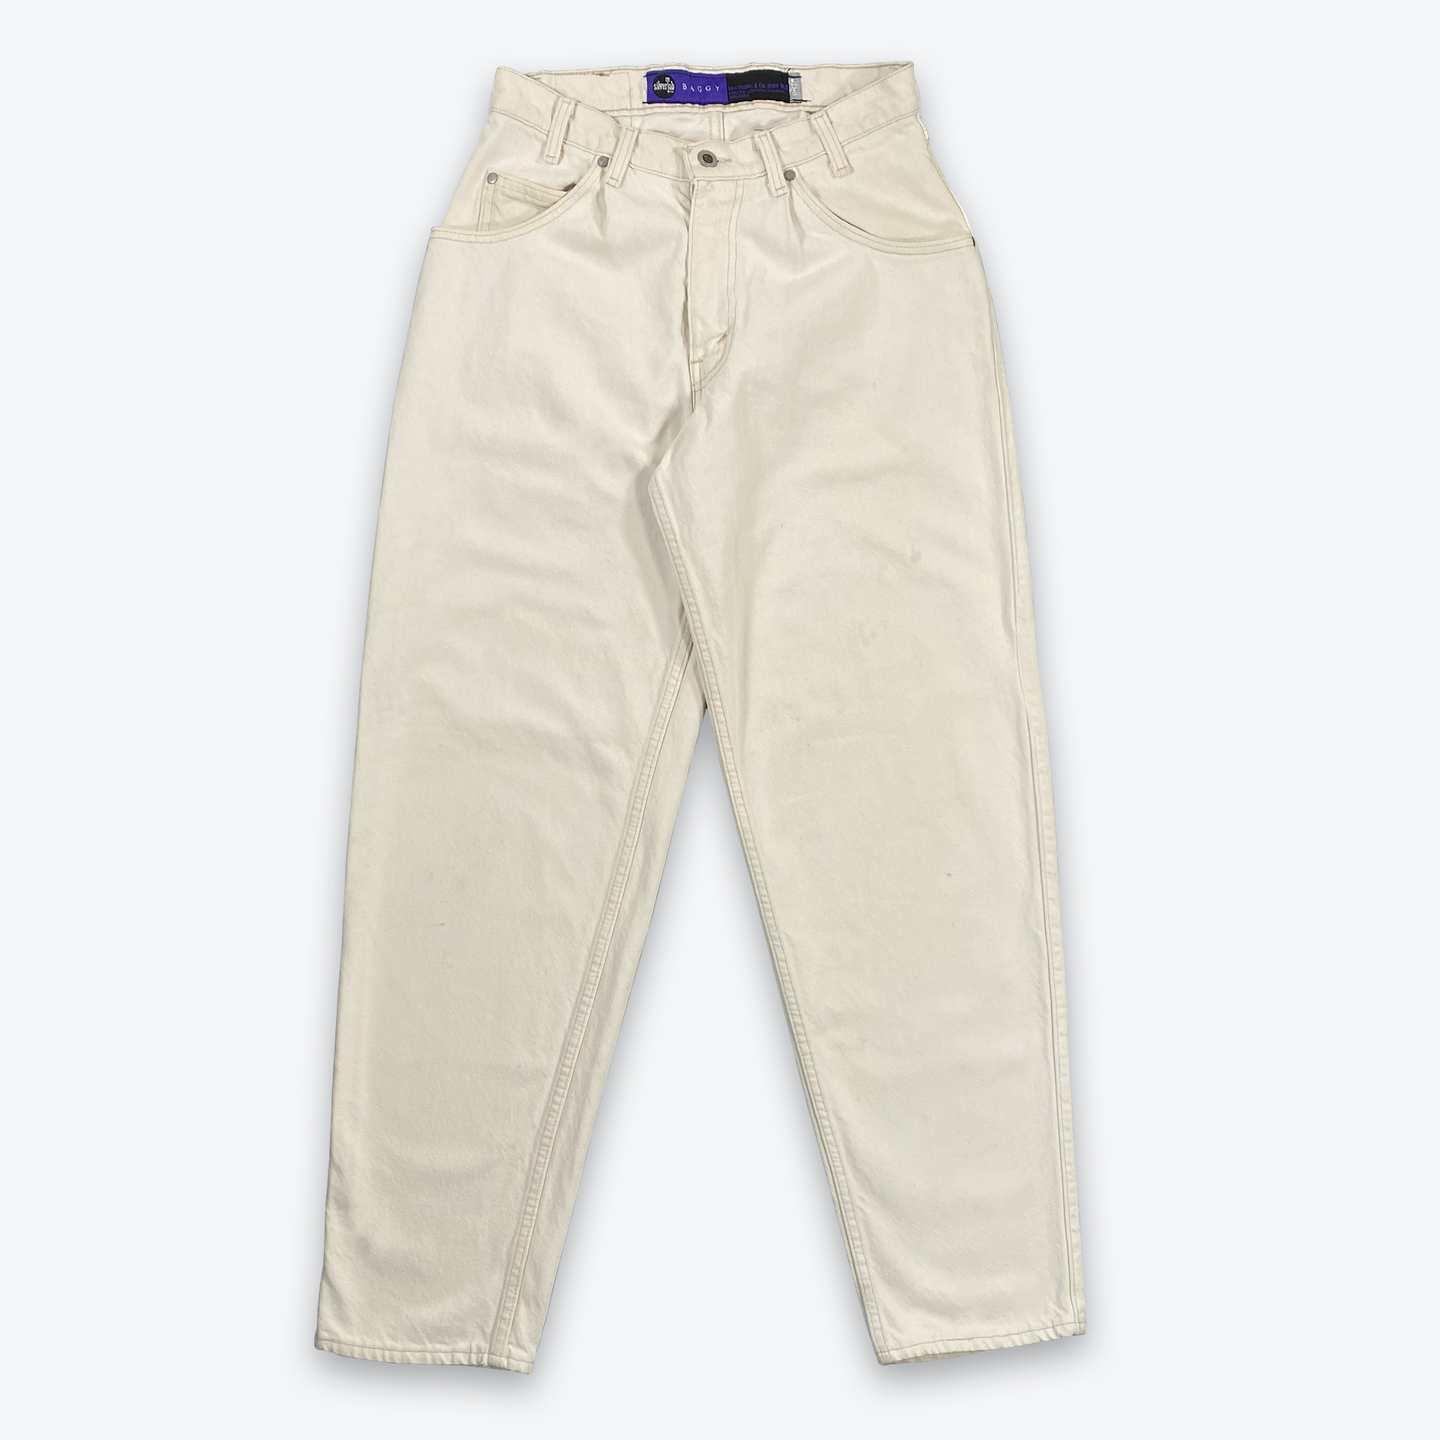 Levi's SilverTab Baggy (Off-White)